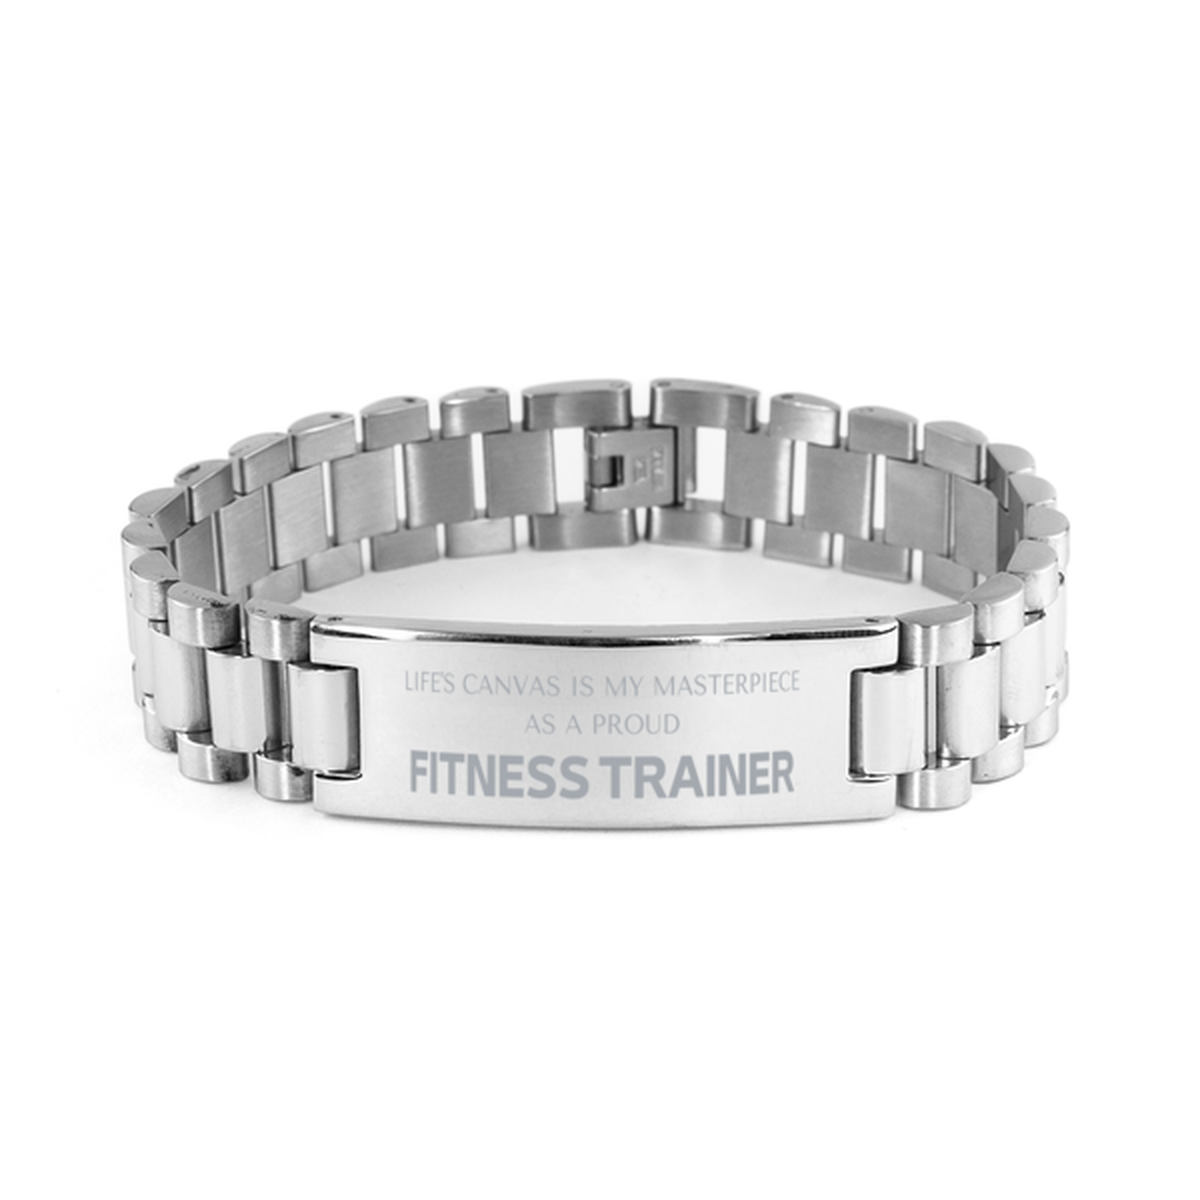 Proud Fitness Trainer Gifts, Life's canvas is my masterpiece, Epic Birthday Christmas Unique Ladder Stainless Steel Bracelet For Fitness Trainer, Coworkers, Men, Women, Friends